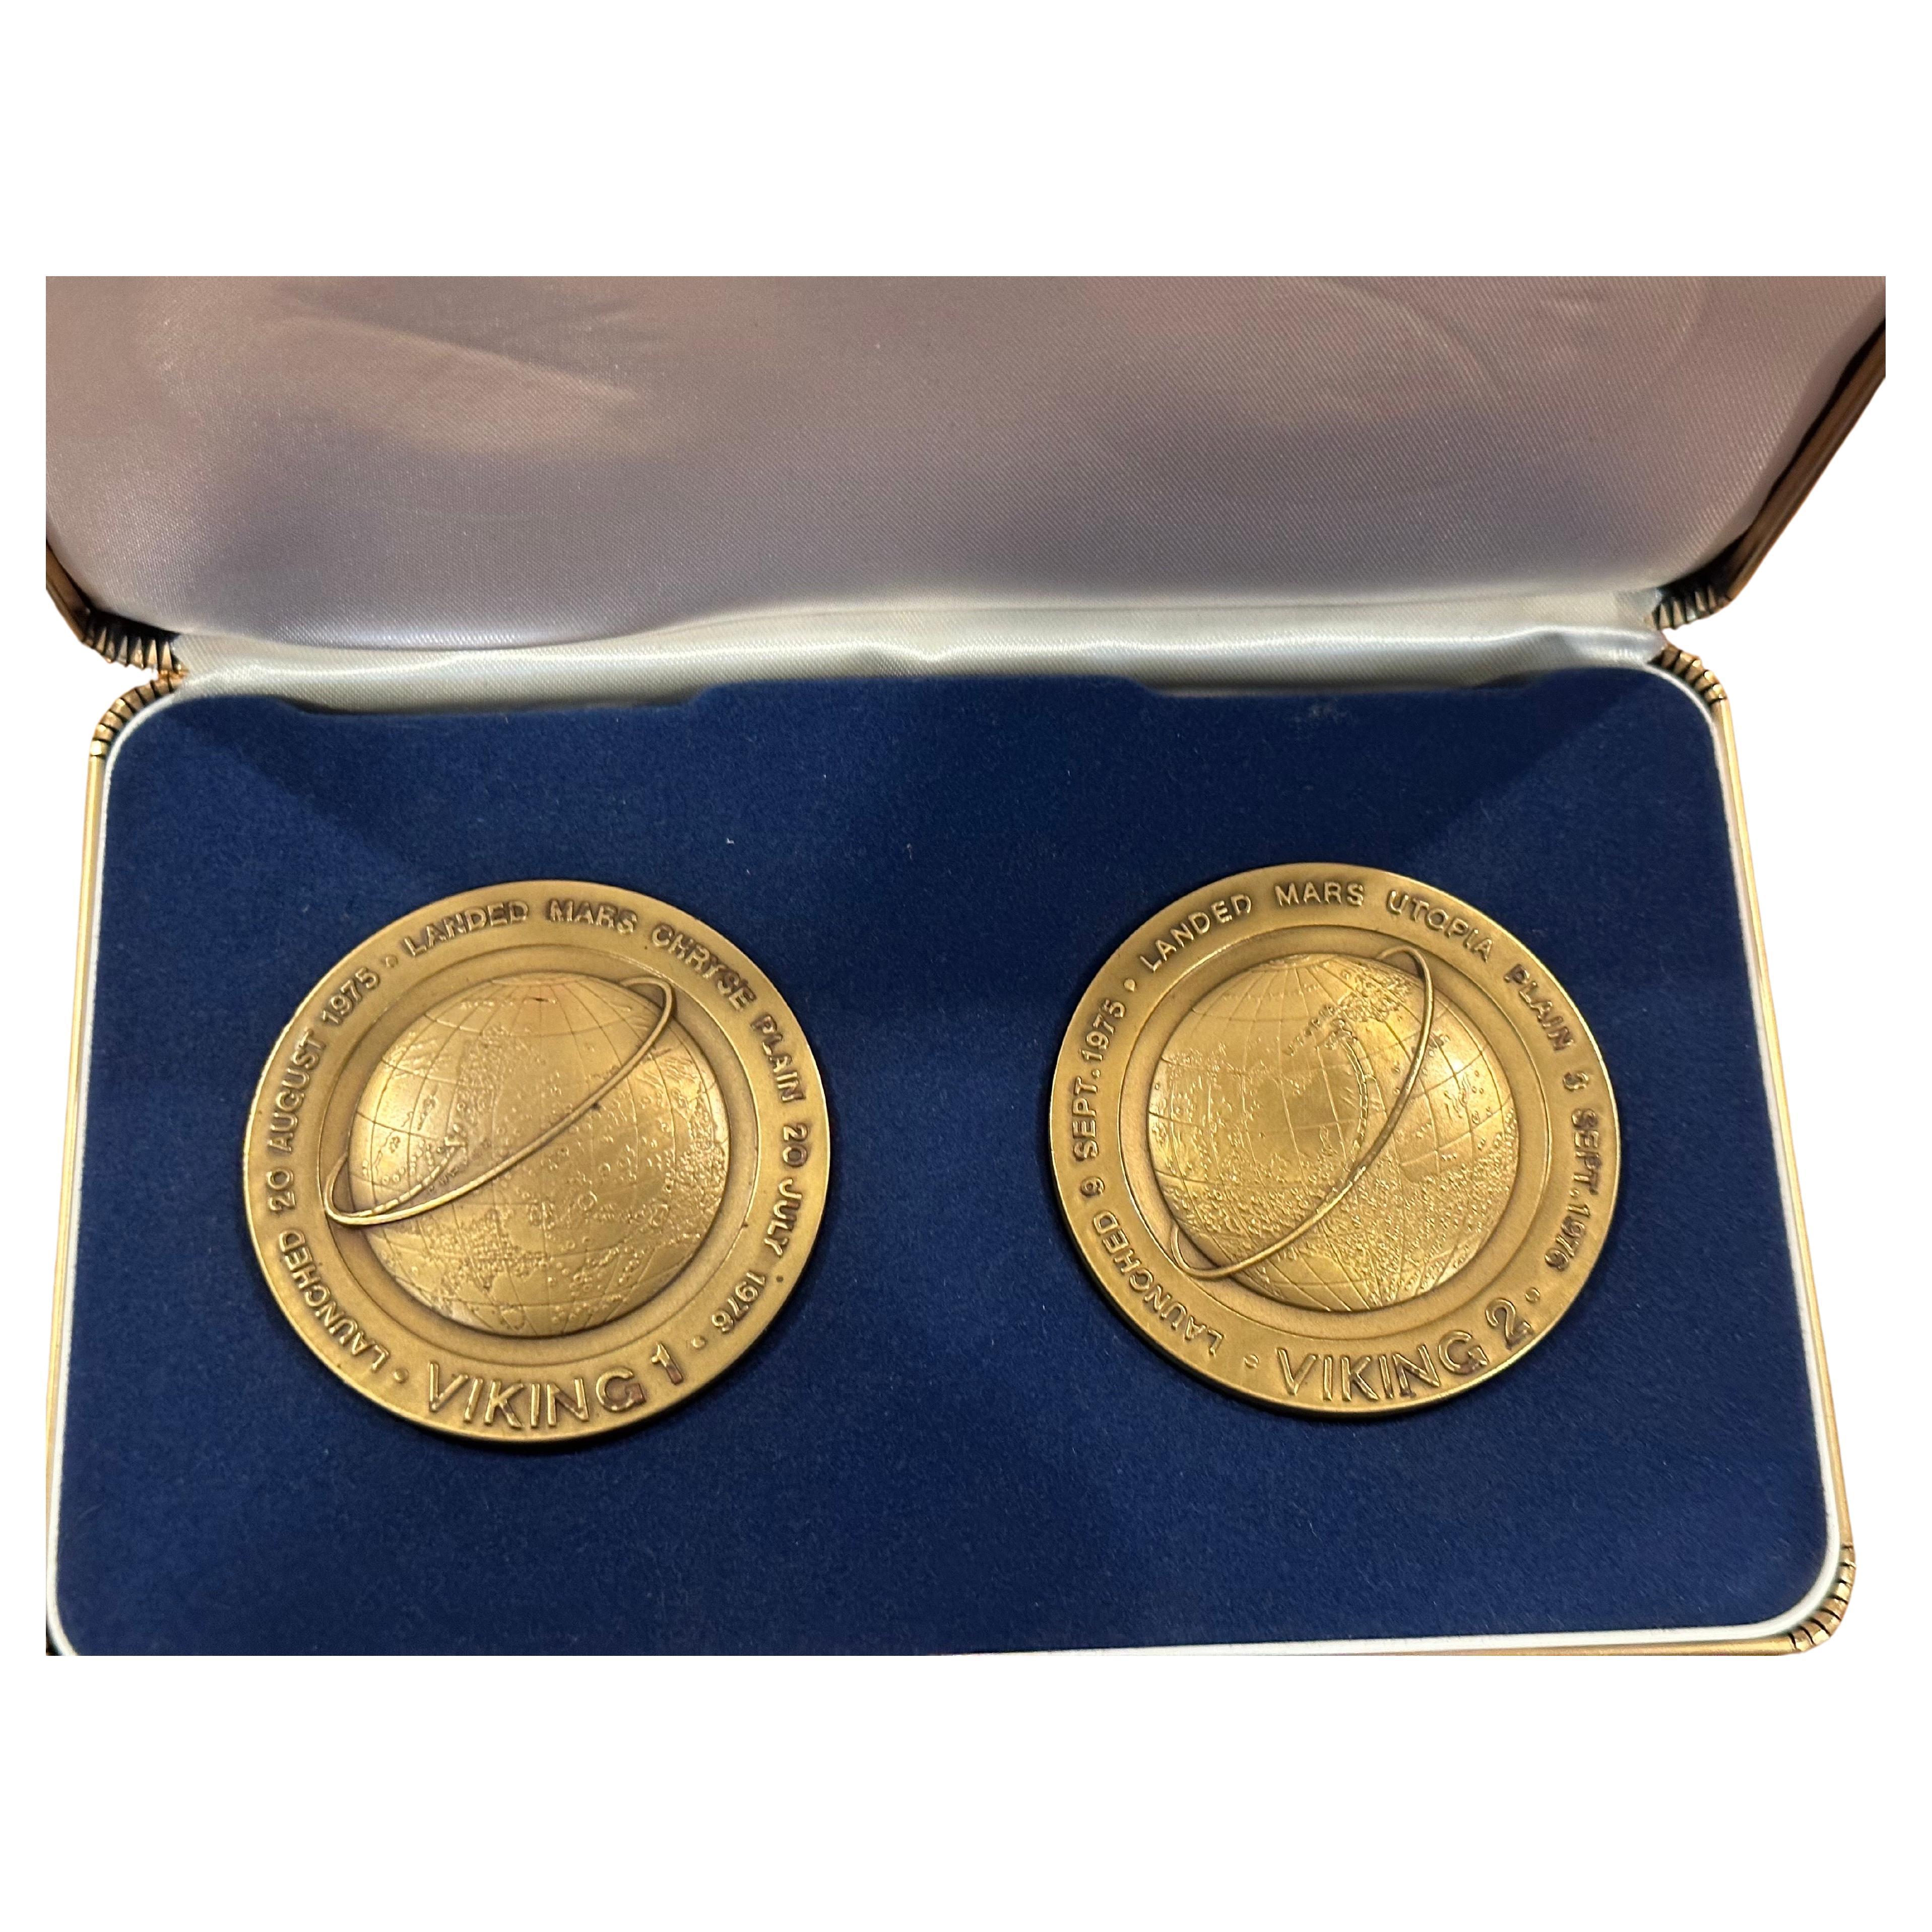 Pair of bronze Viking 1 and 2 Mars landing commemorative medallions, circa 1976.  This rare pair was issued by Medallic Art Co. to commemorate the Viking Mission in 1976; each spacecraft was composed of two main parts: an orbiter designed to